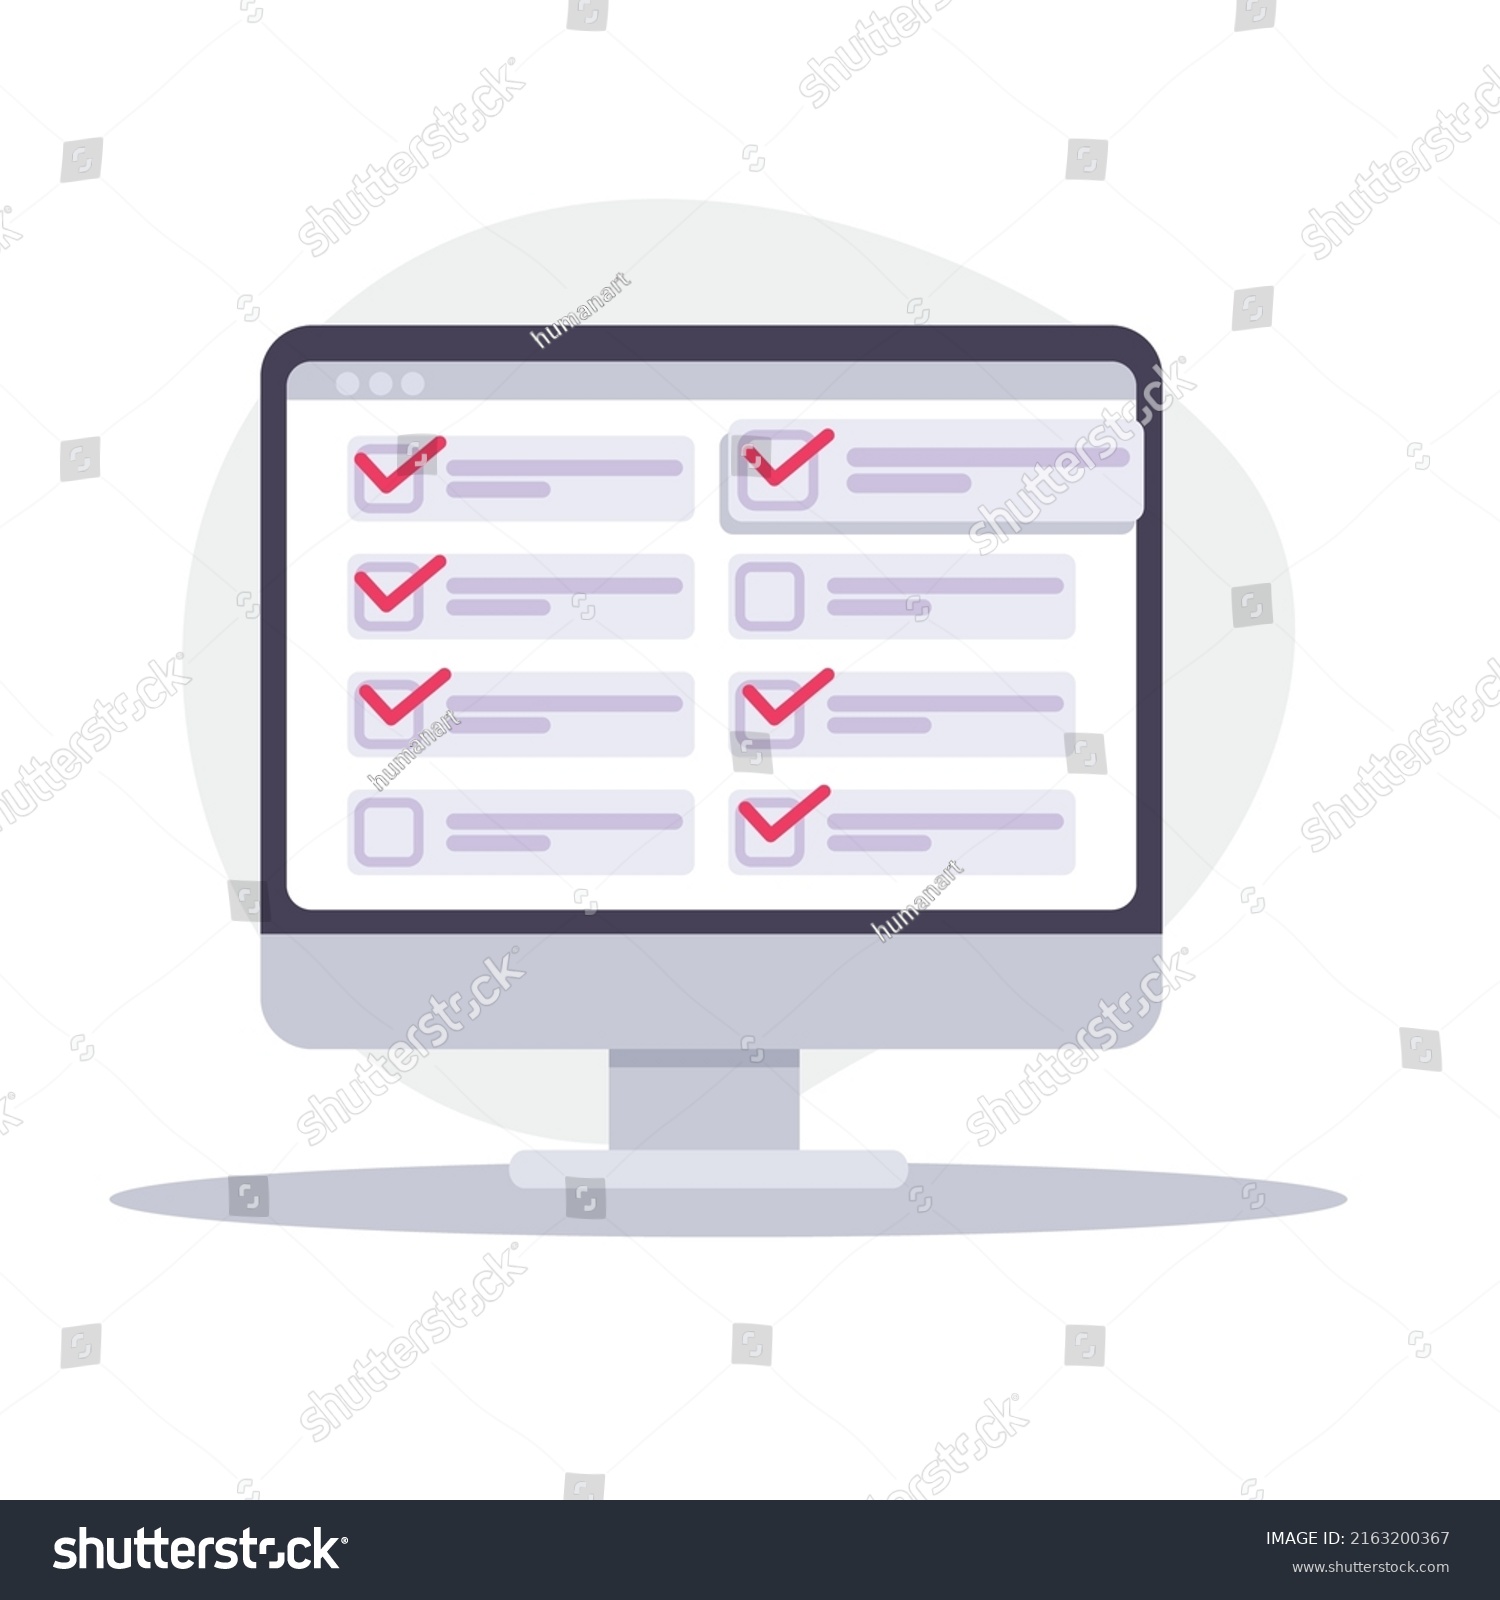 Checklist Vector Check Marks Checkboxes On Stock Vector Royalty Free 2163200367 Shutterstock 7615